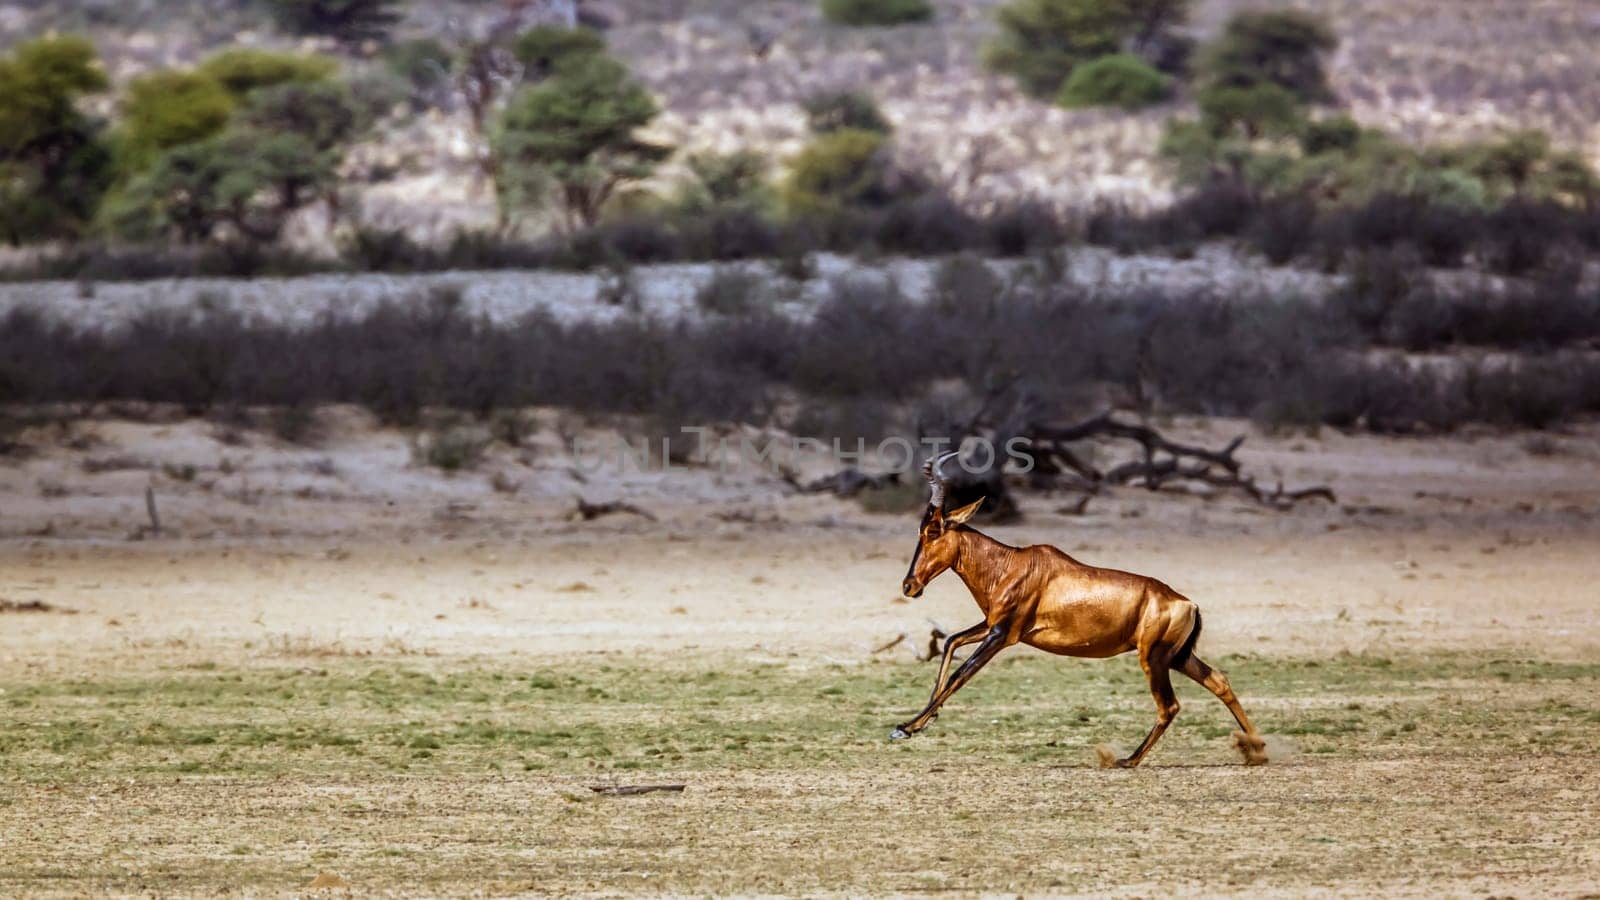 Hartebeest running side view in dry land in Kgalagadi transfrontier park, South Africa; specie Alcelaphus buselaphus family of Bovidae